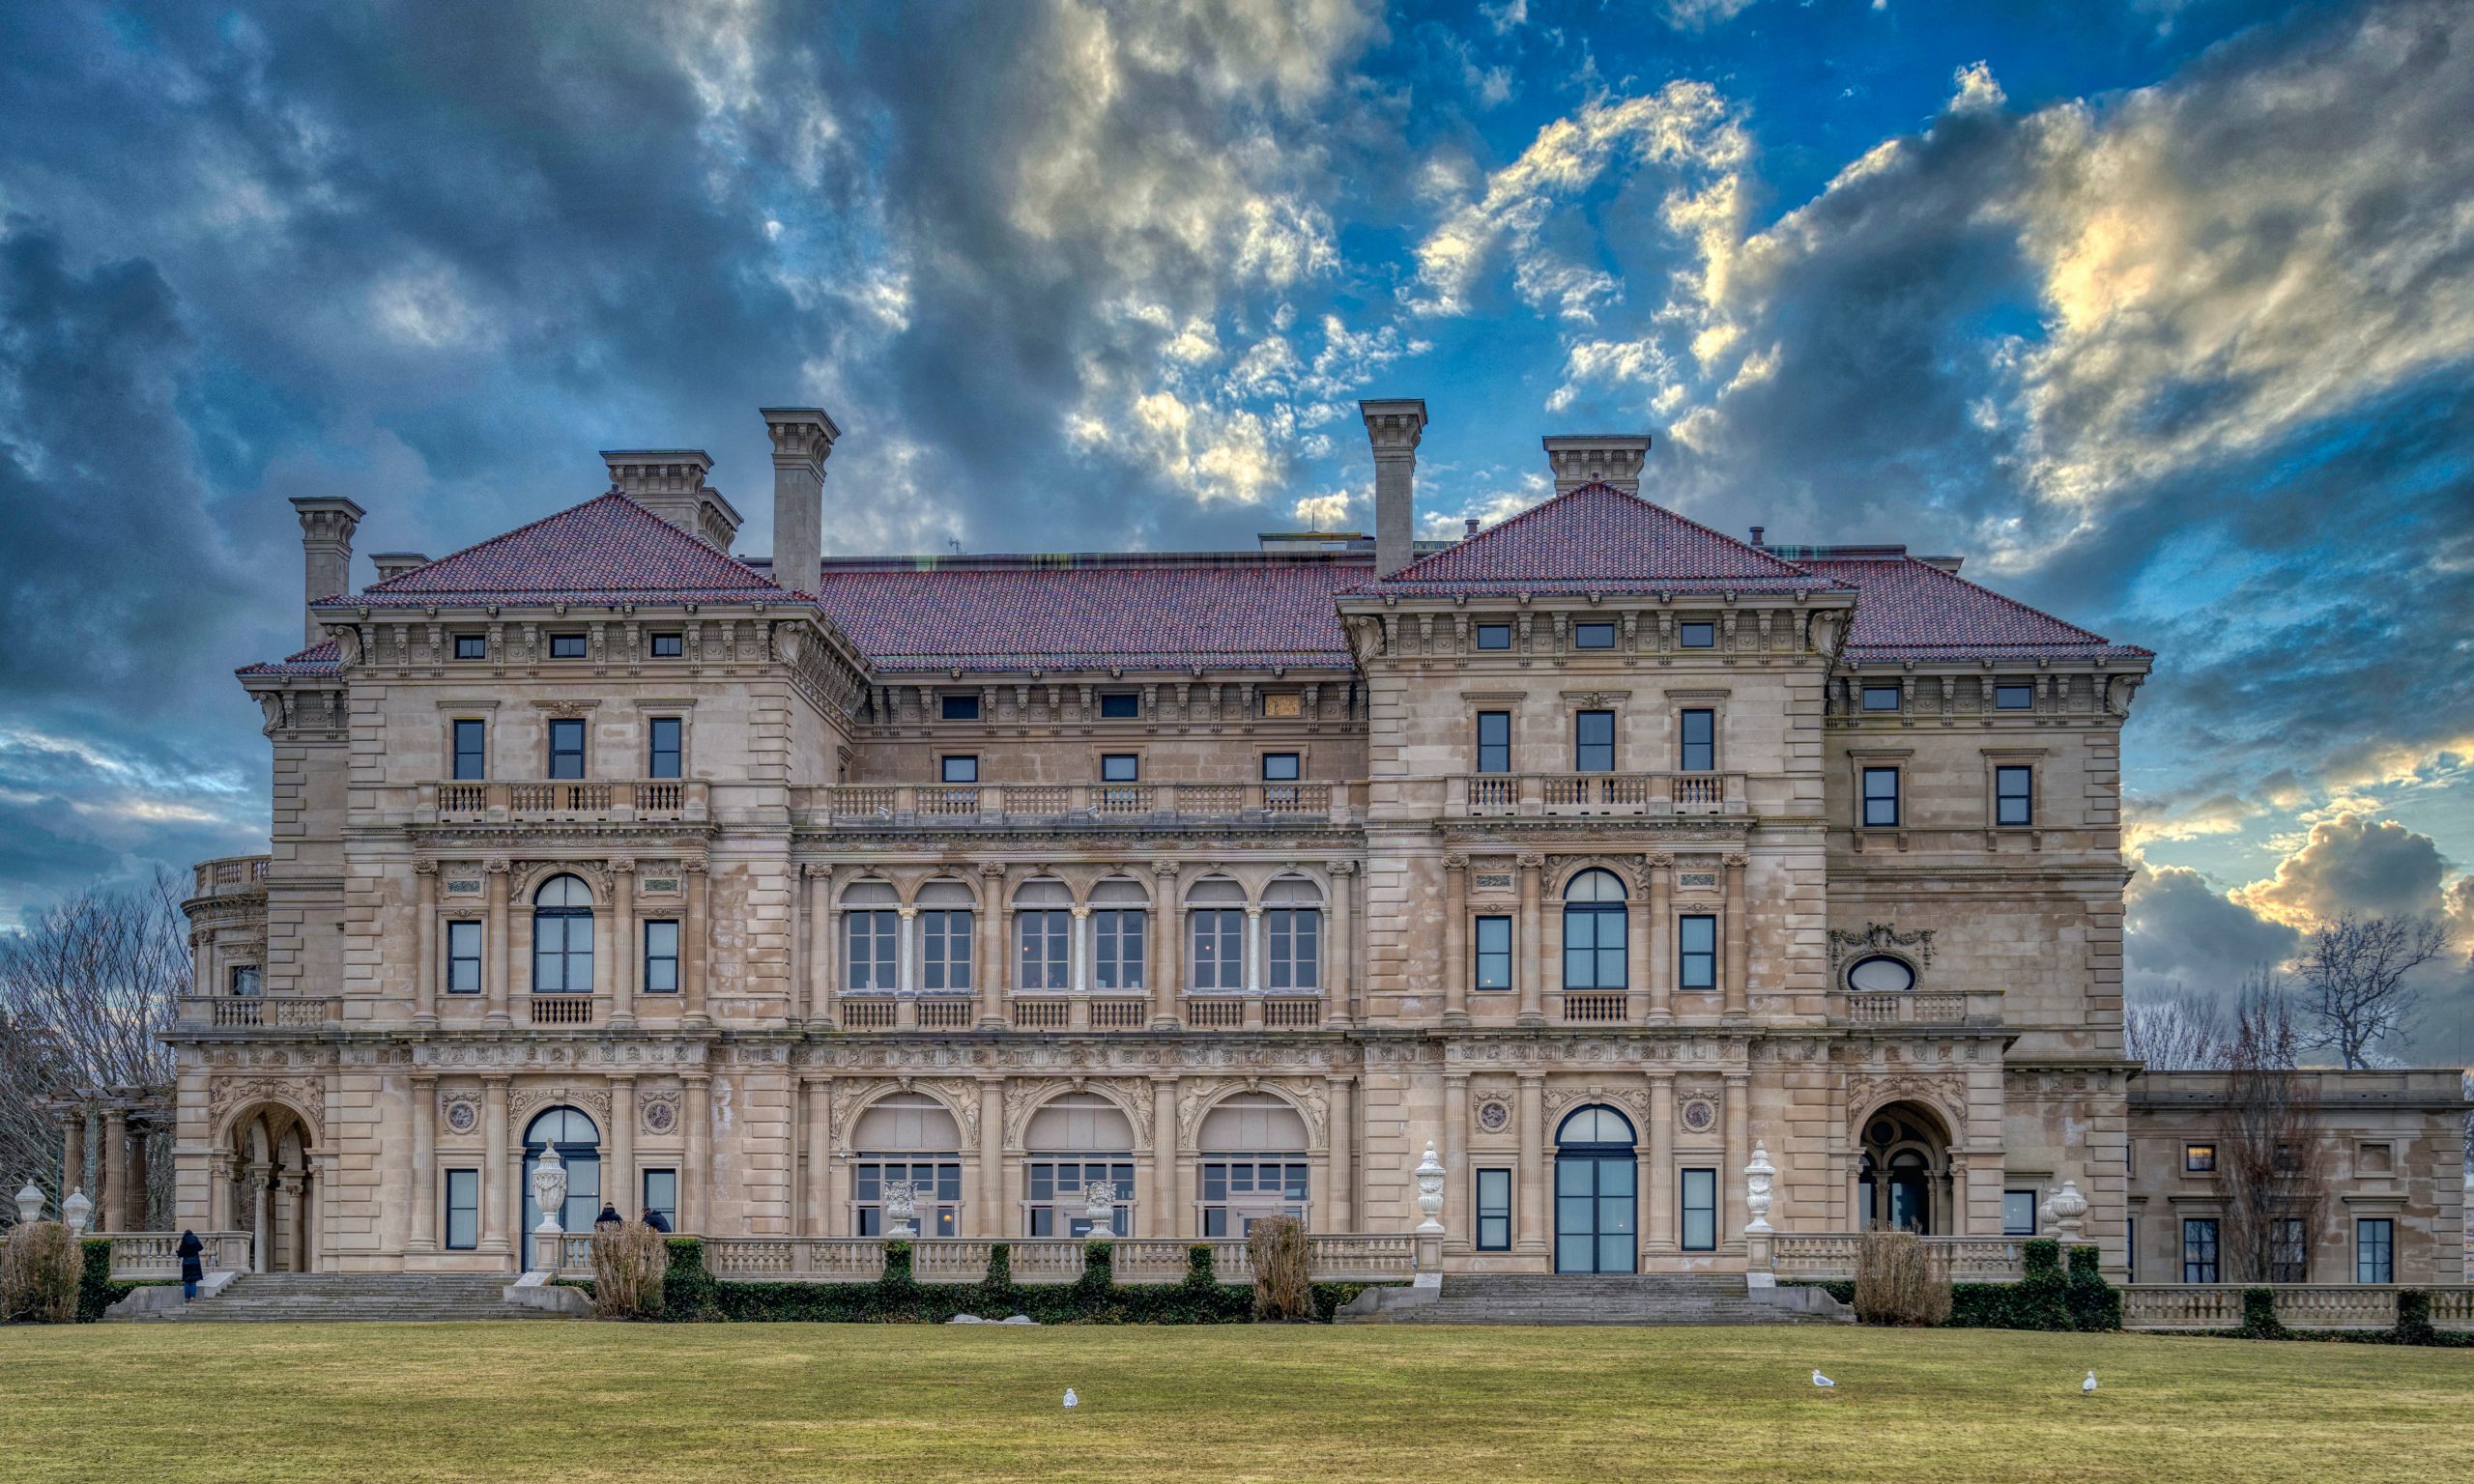 The Breakers. Photo by Michael Denning on Unsplash